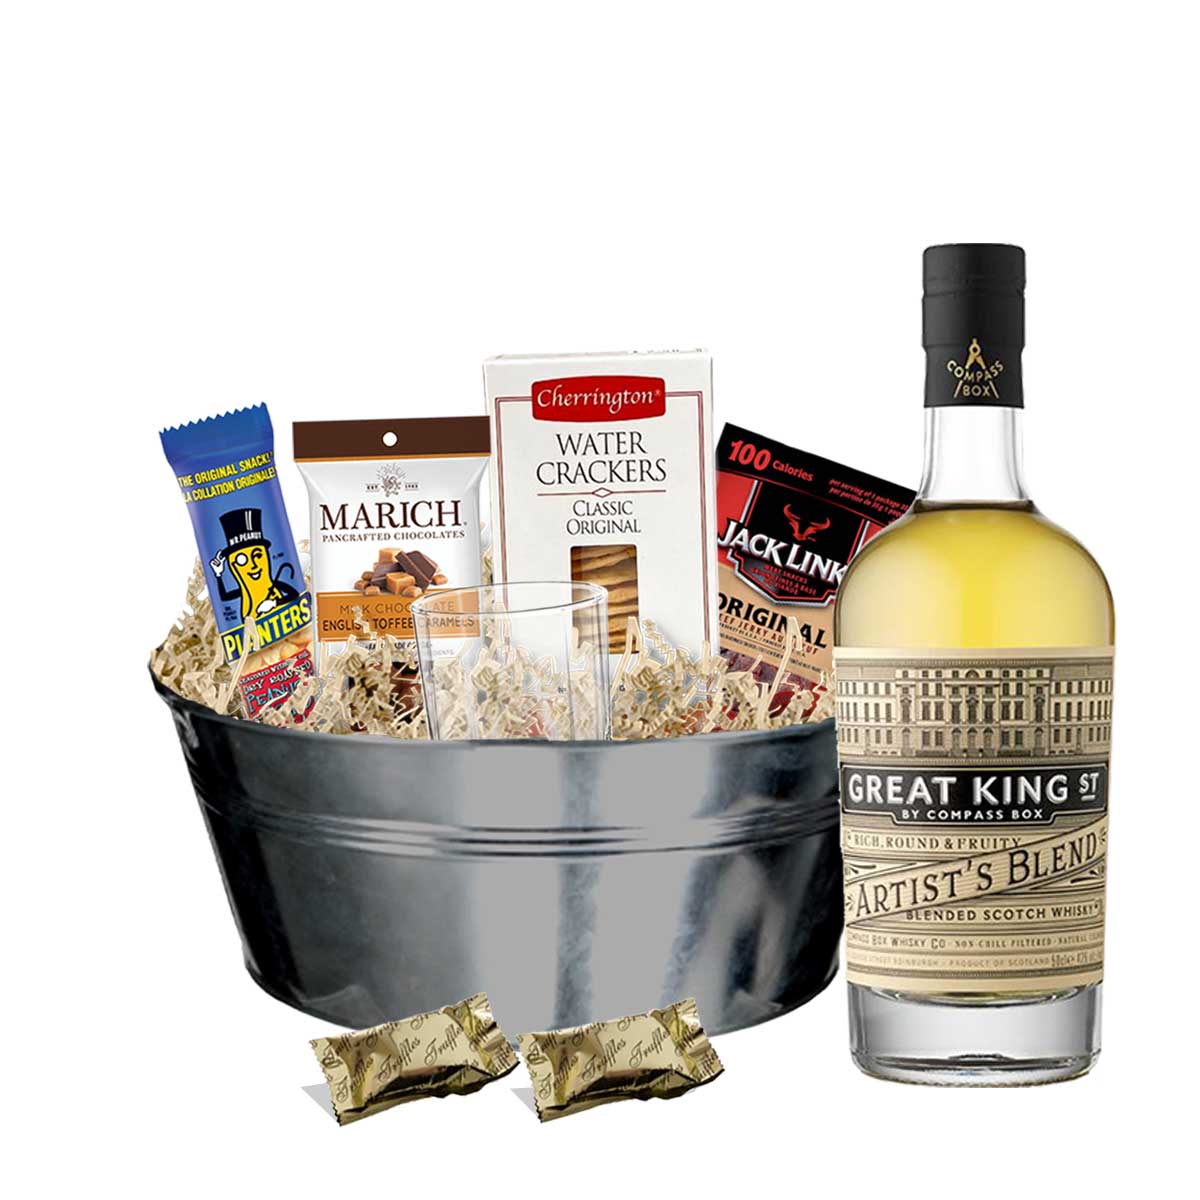 TAG Liquor Stores BC - Compass Box Great King Street Artist's Blend Scotch Whisky 750ml Gift Basket